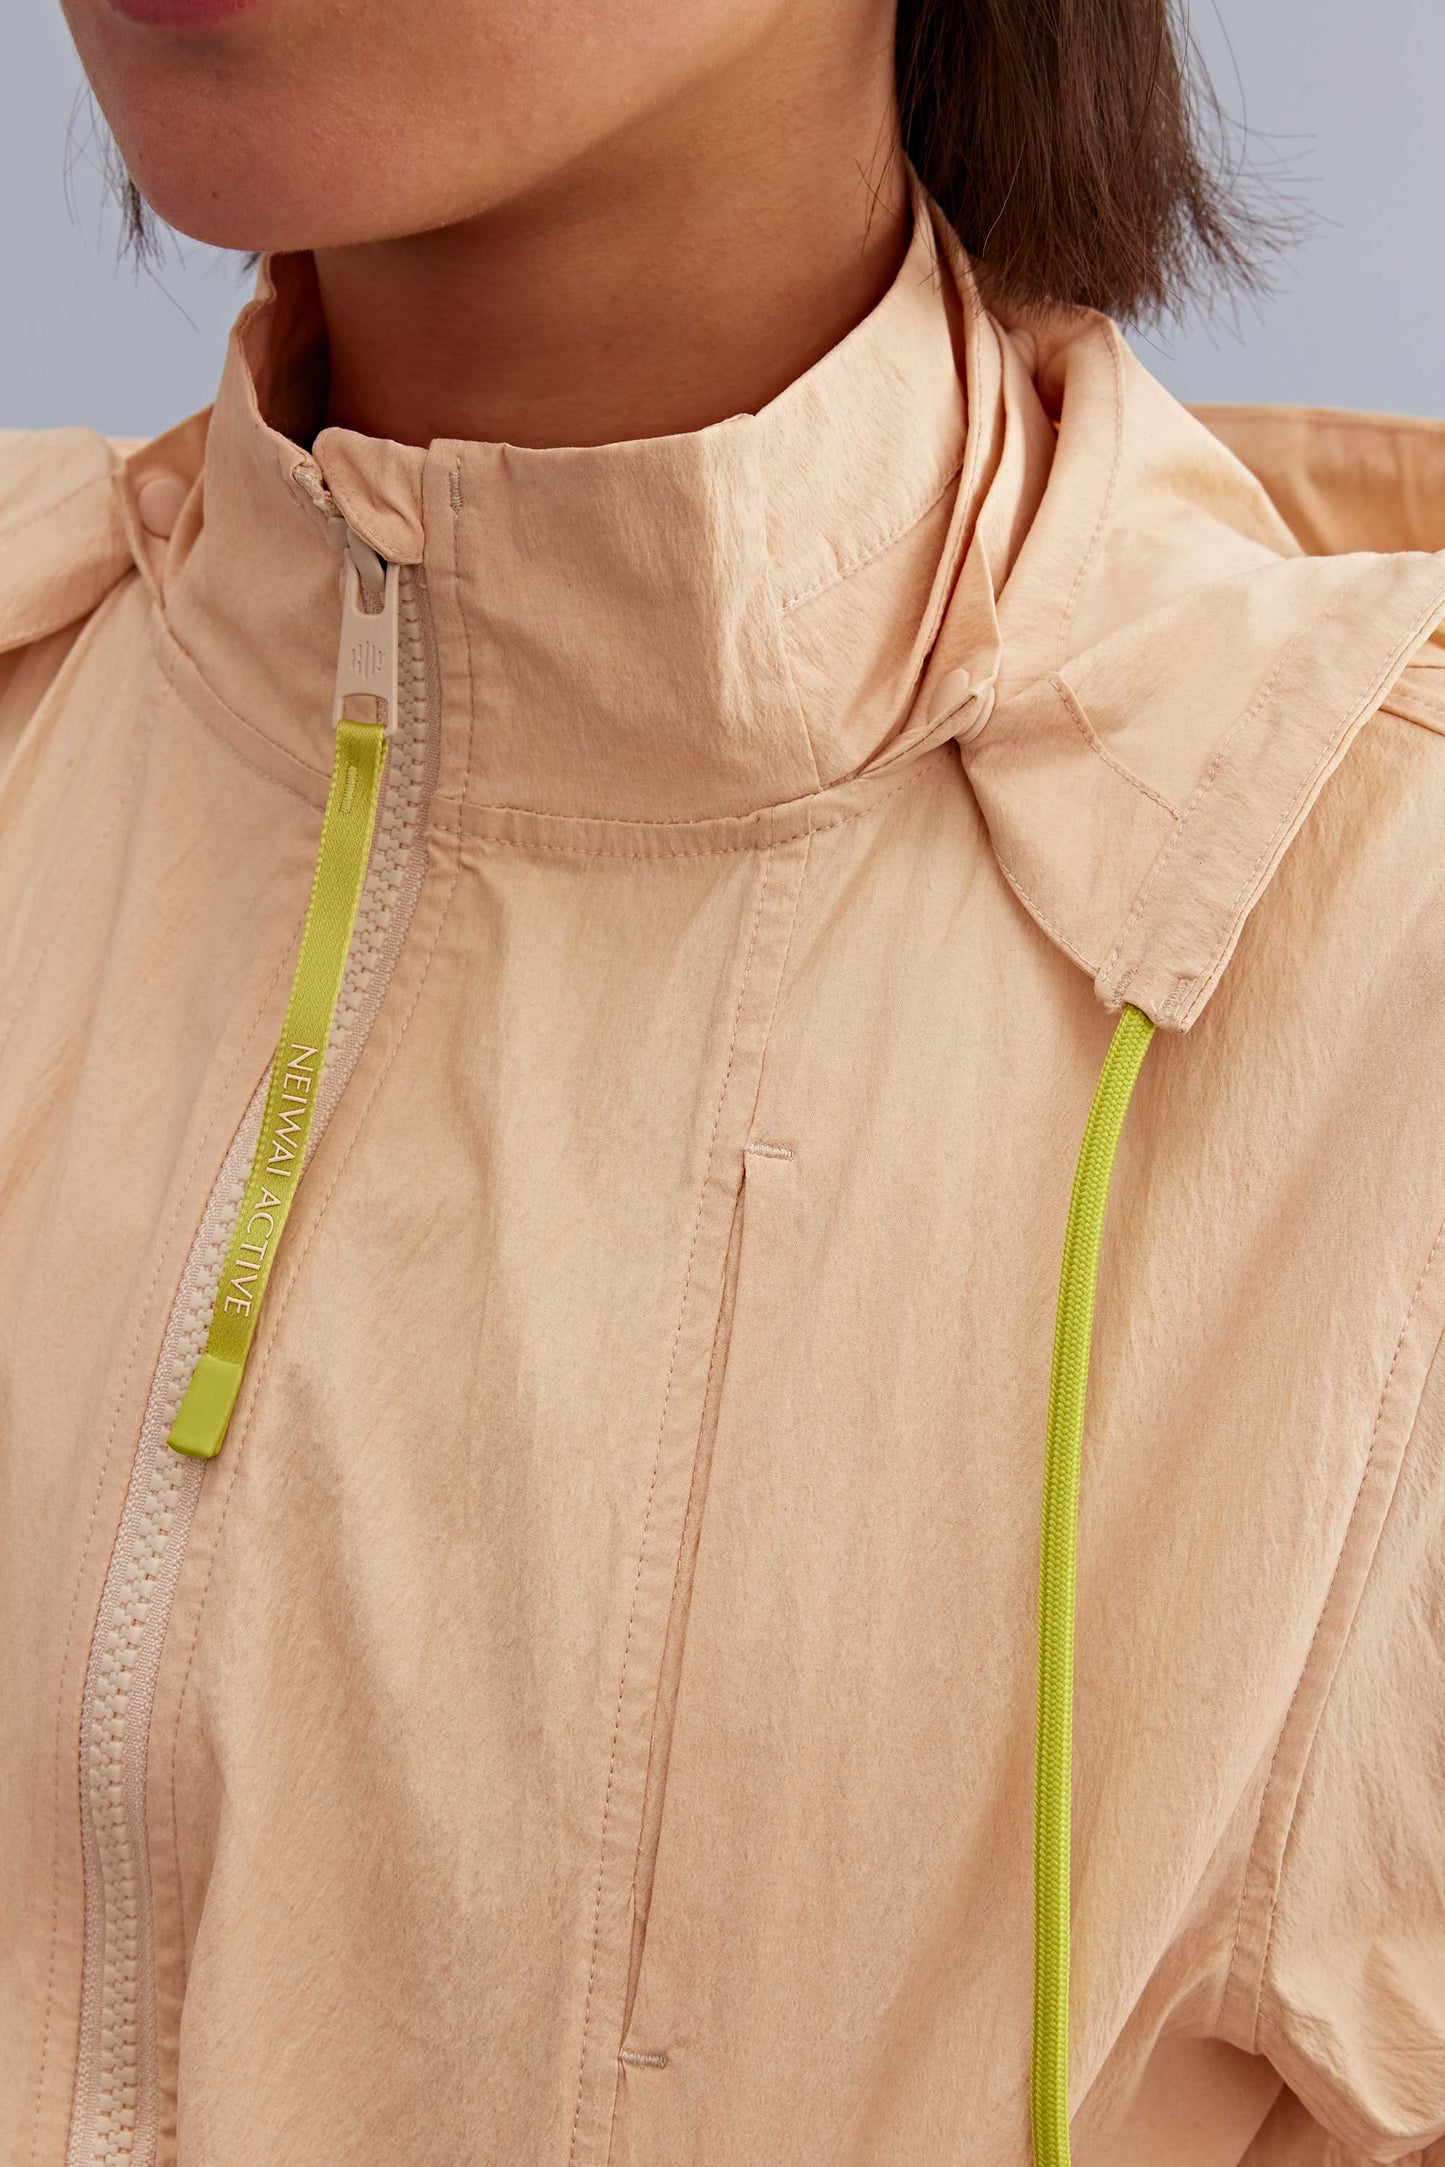 detail of the warm yellow jacket with green strings. 